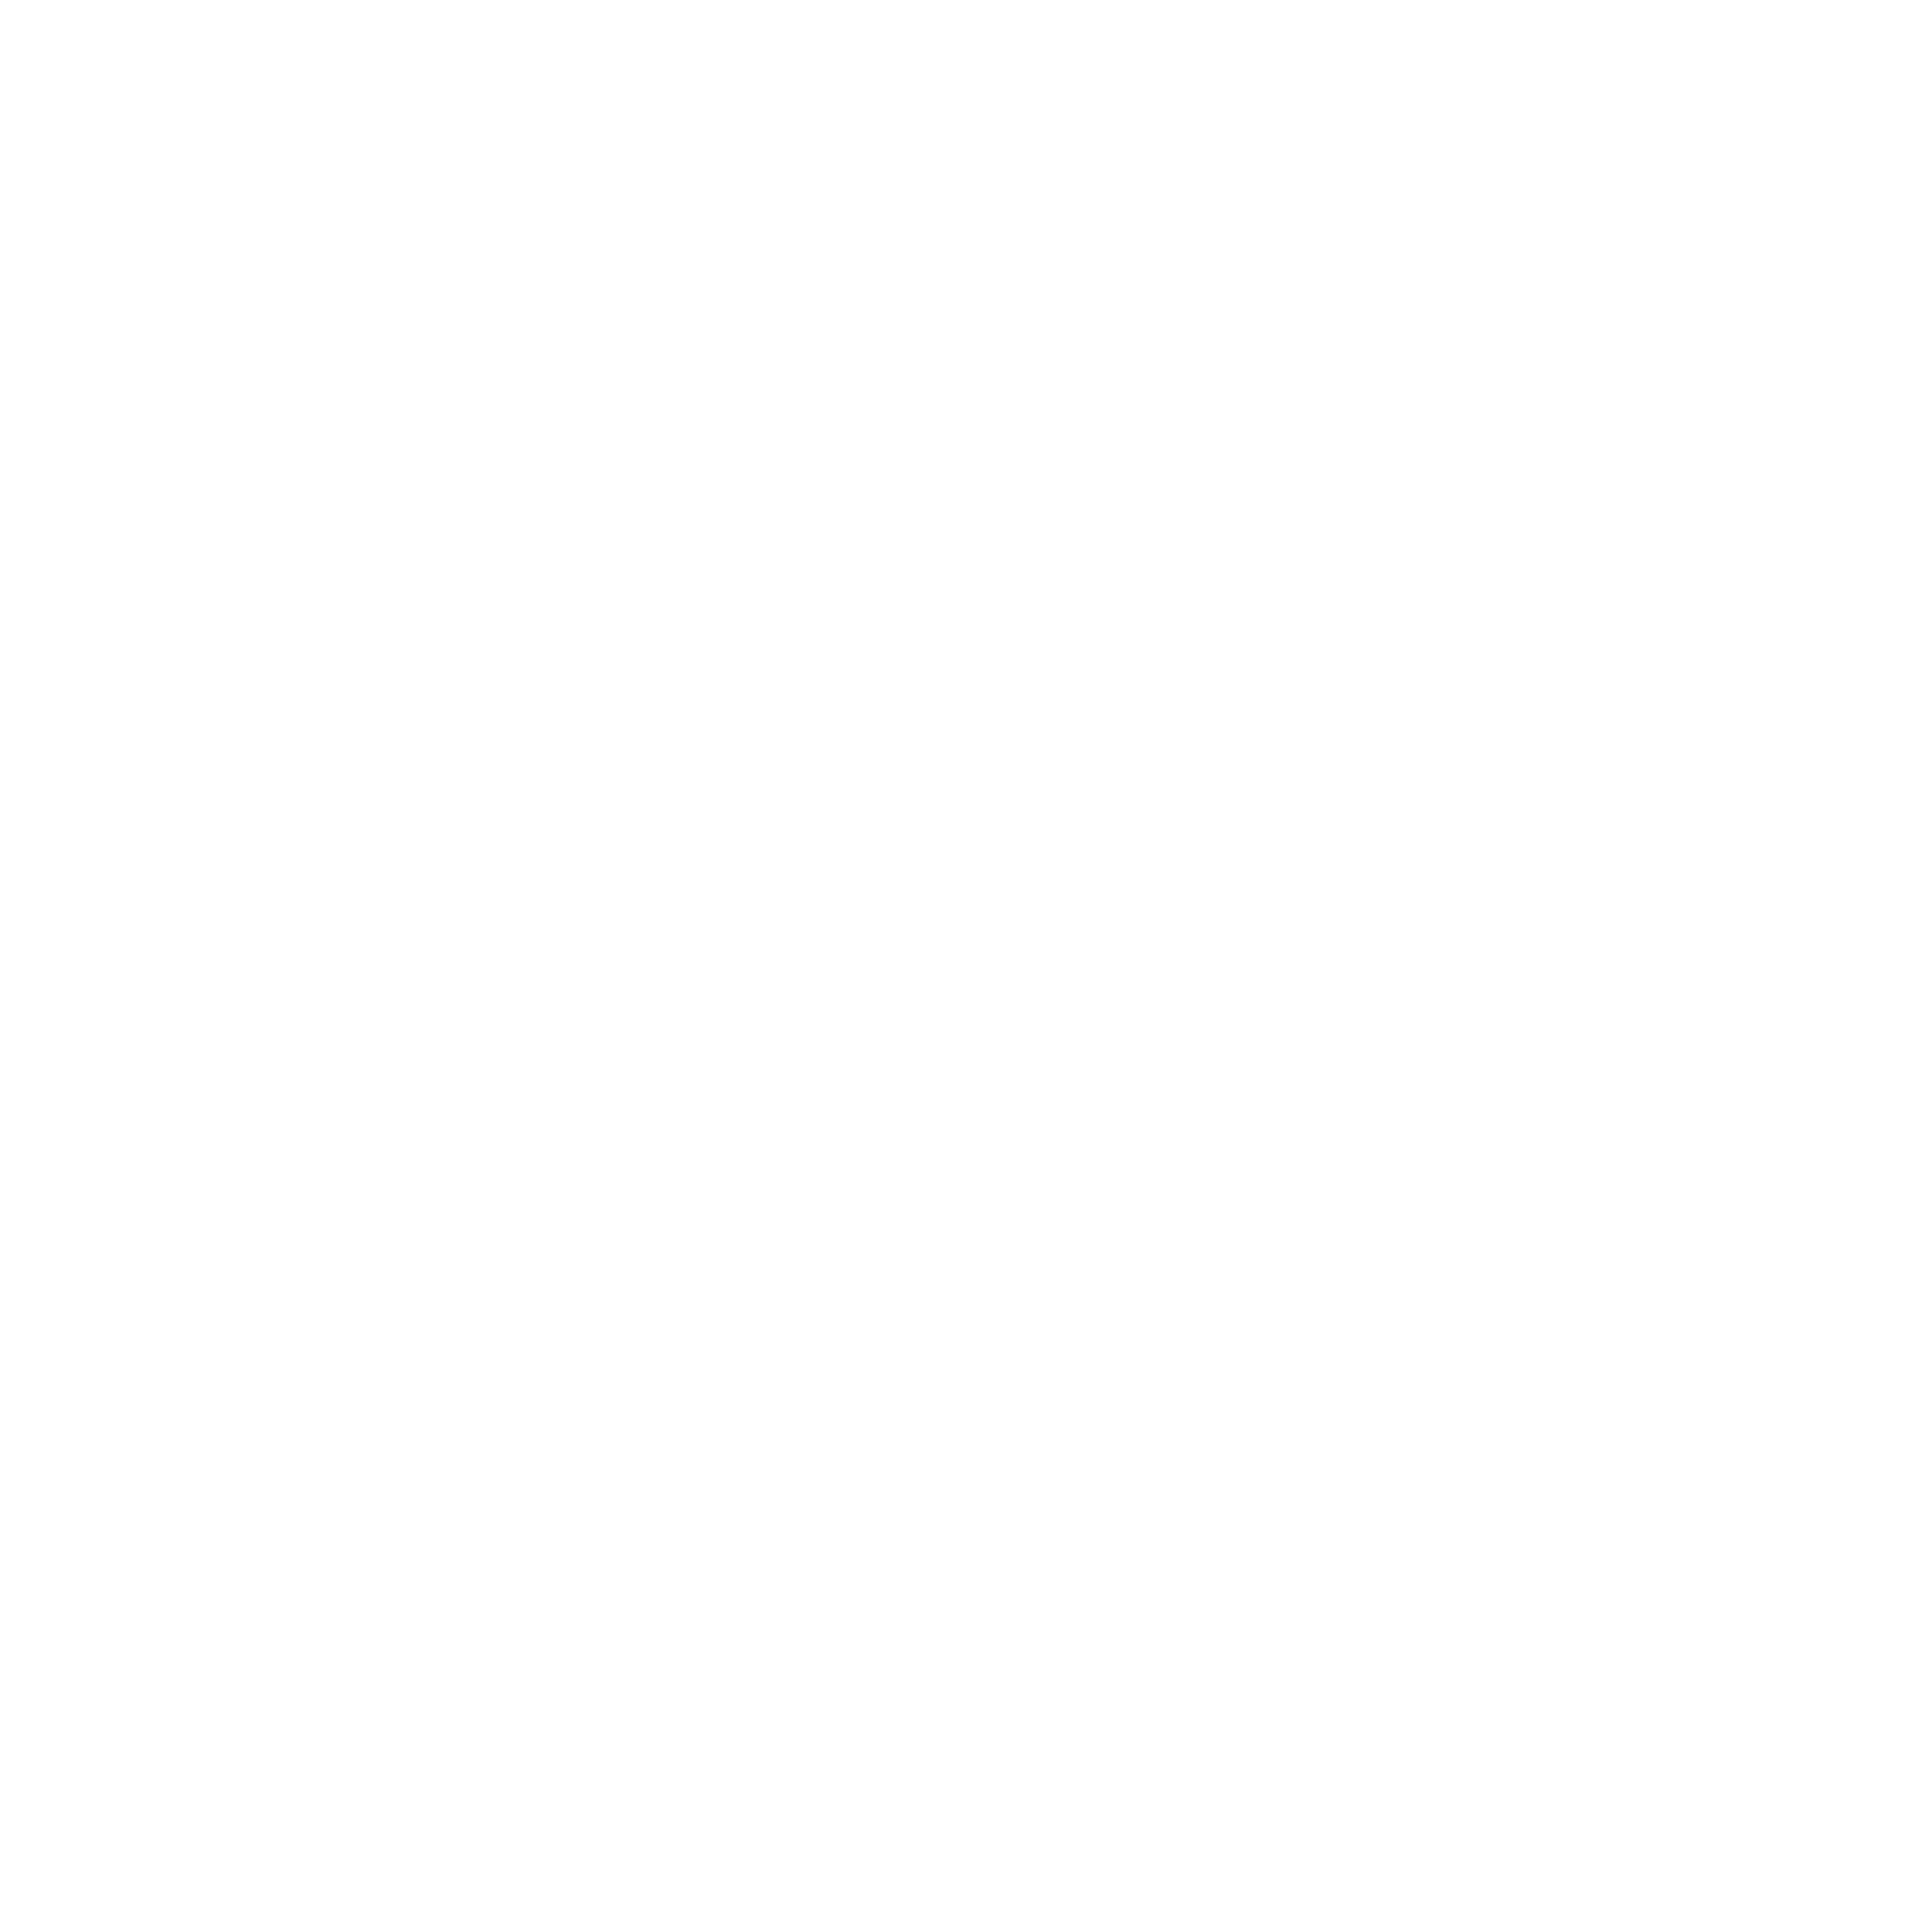 Bodleian Libraries